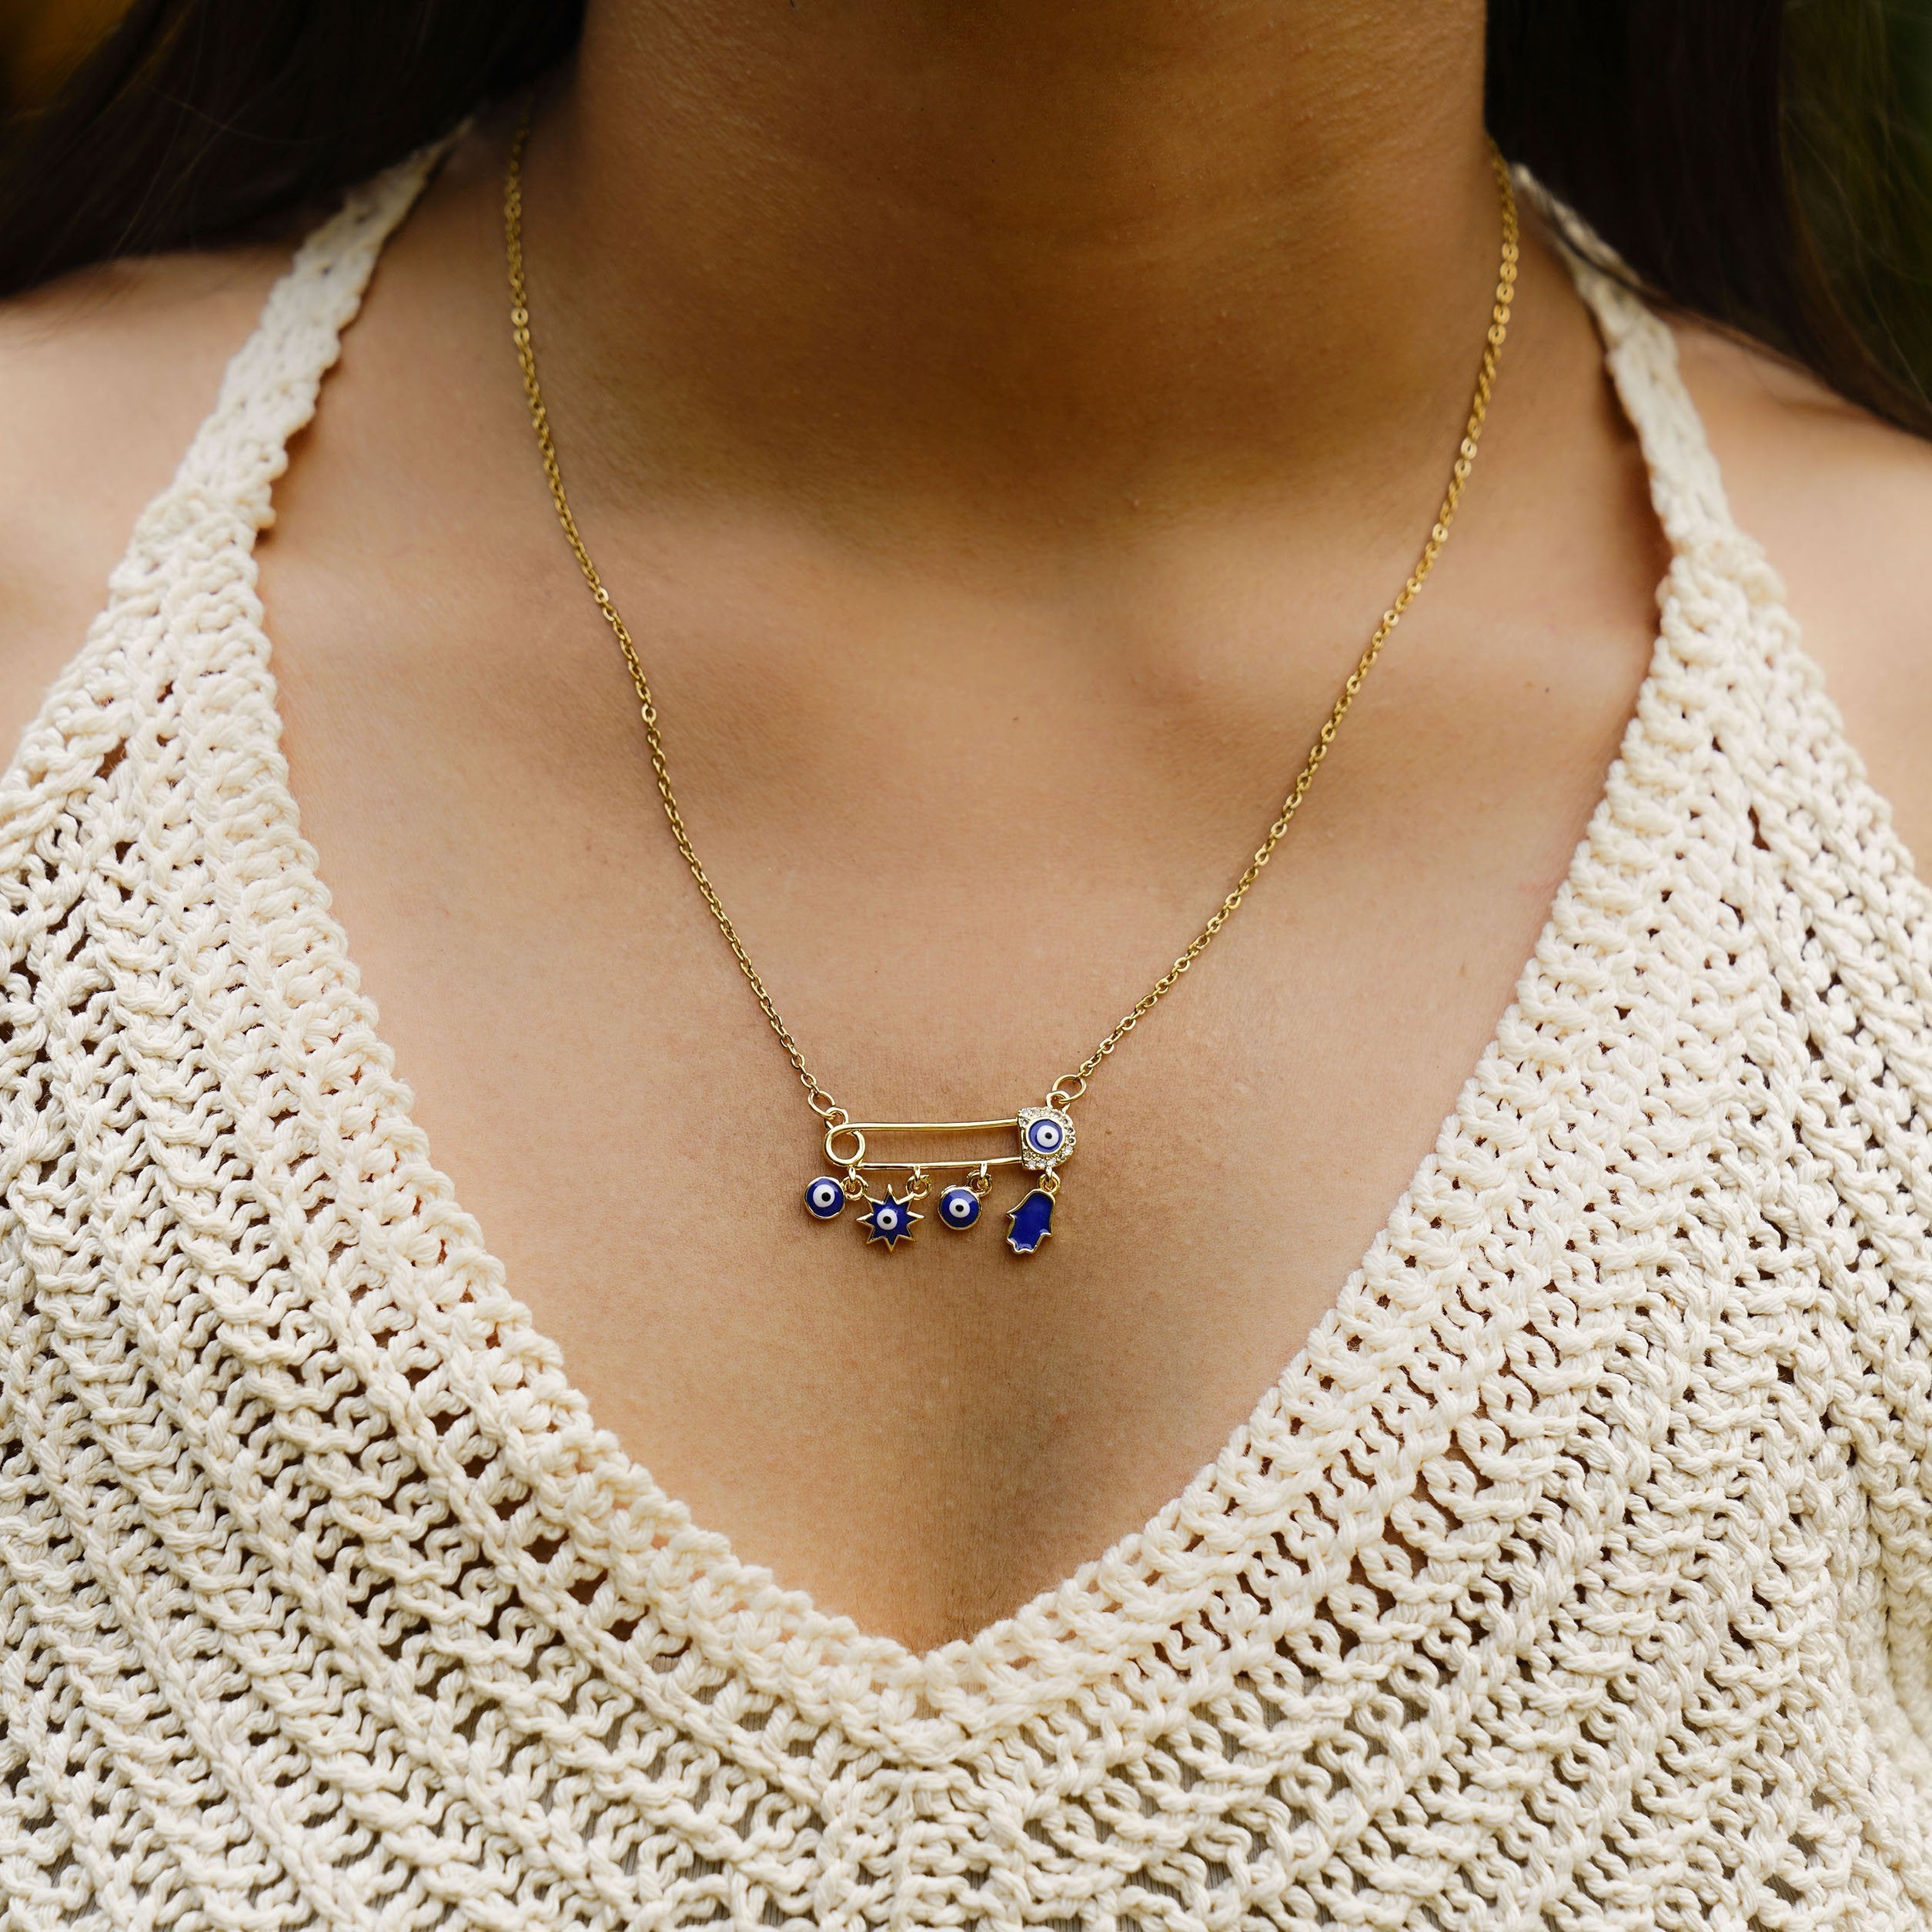 Safety Pin Charm Necklace - Upakarna Jewelry